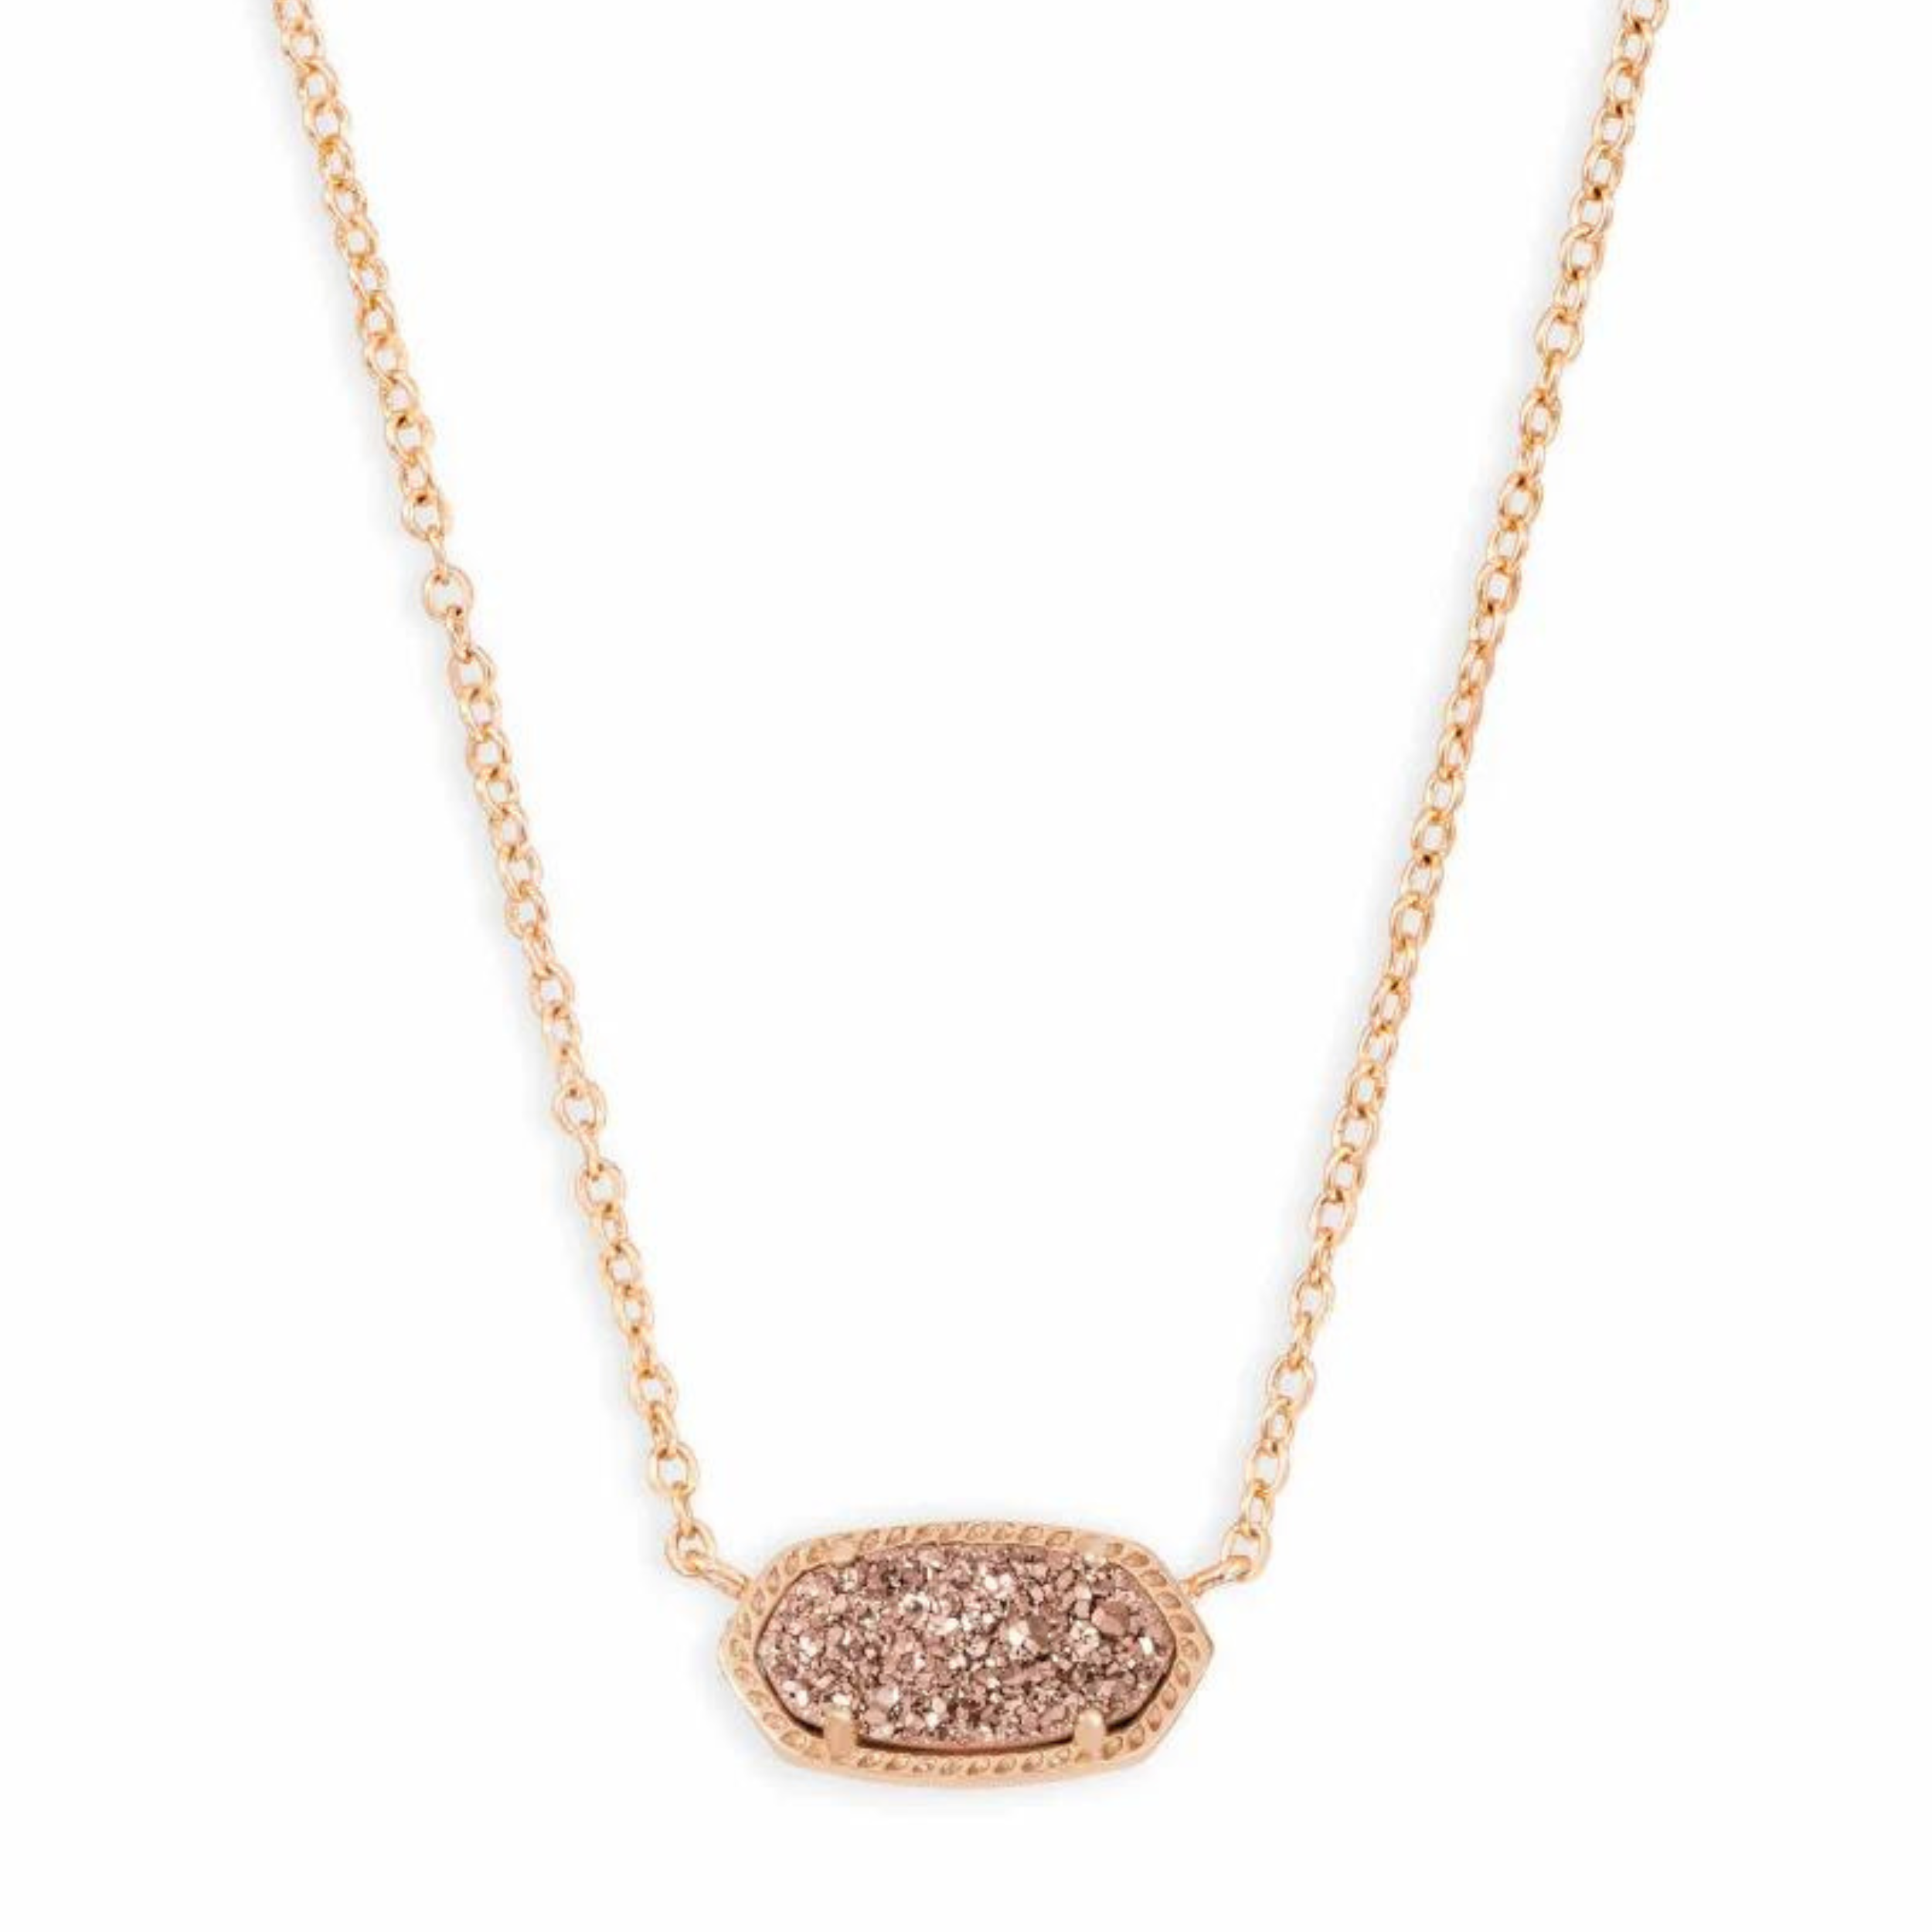 Rose gold pendant necklace with a rose gold drusy stone, pictured on a white background.